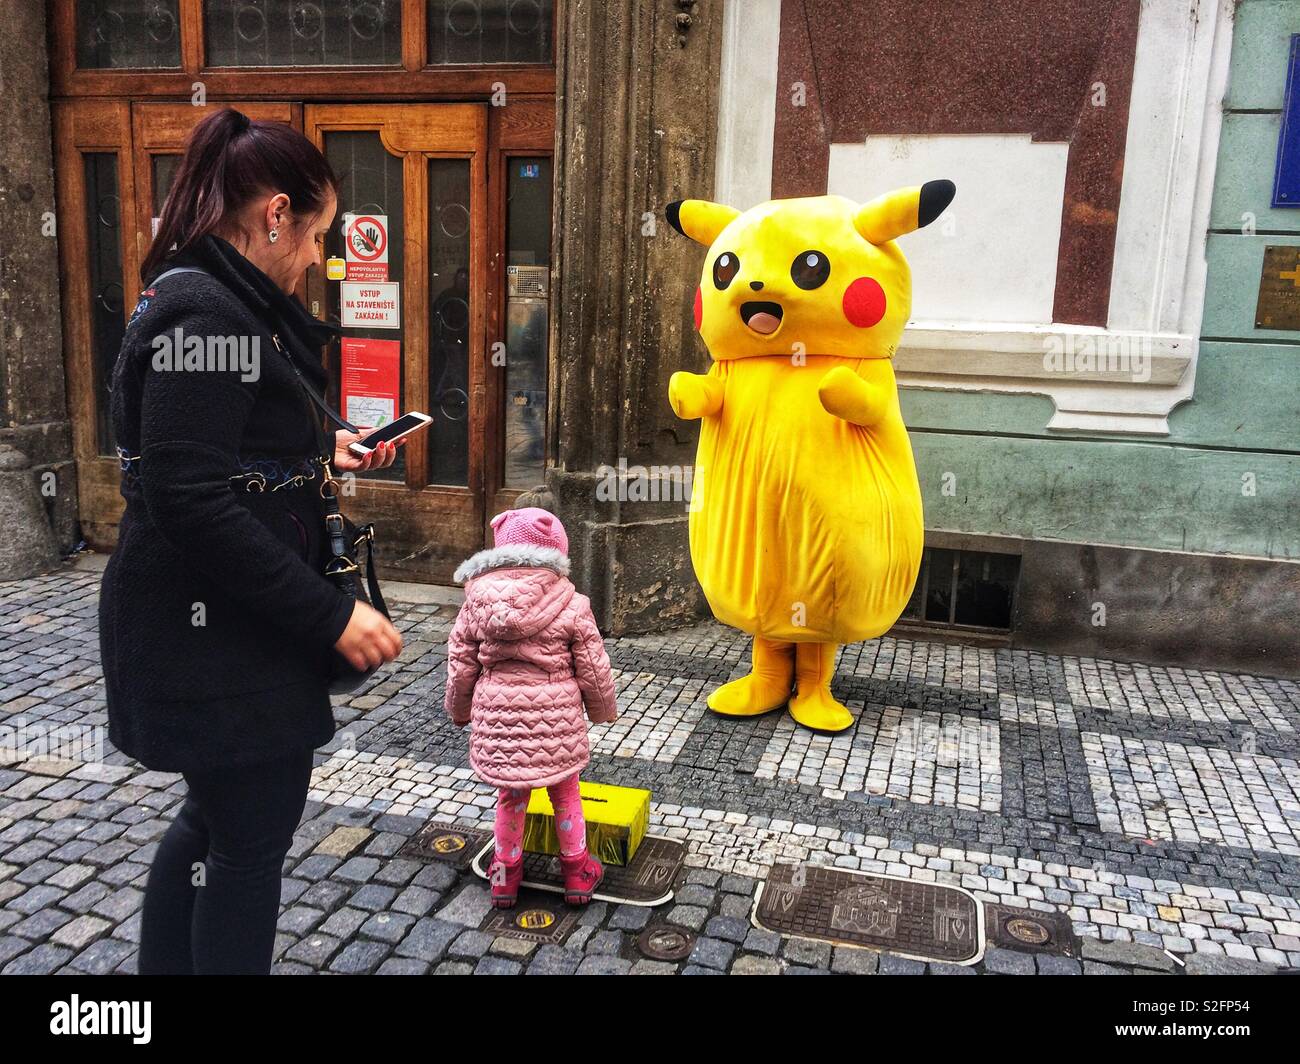 A Person Dressed In An Inflatable Pikachu Costume To Entertain